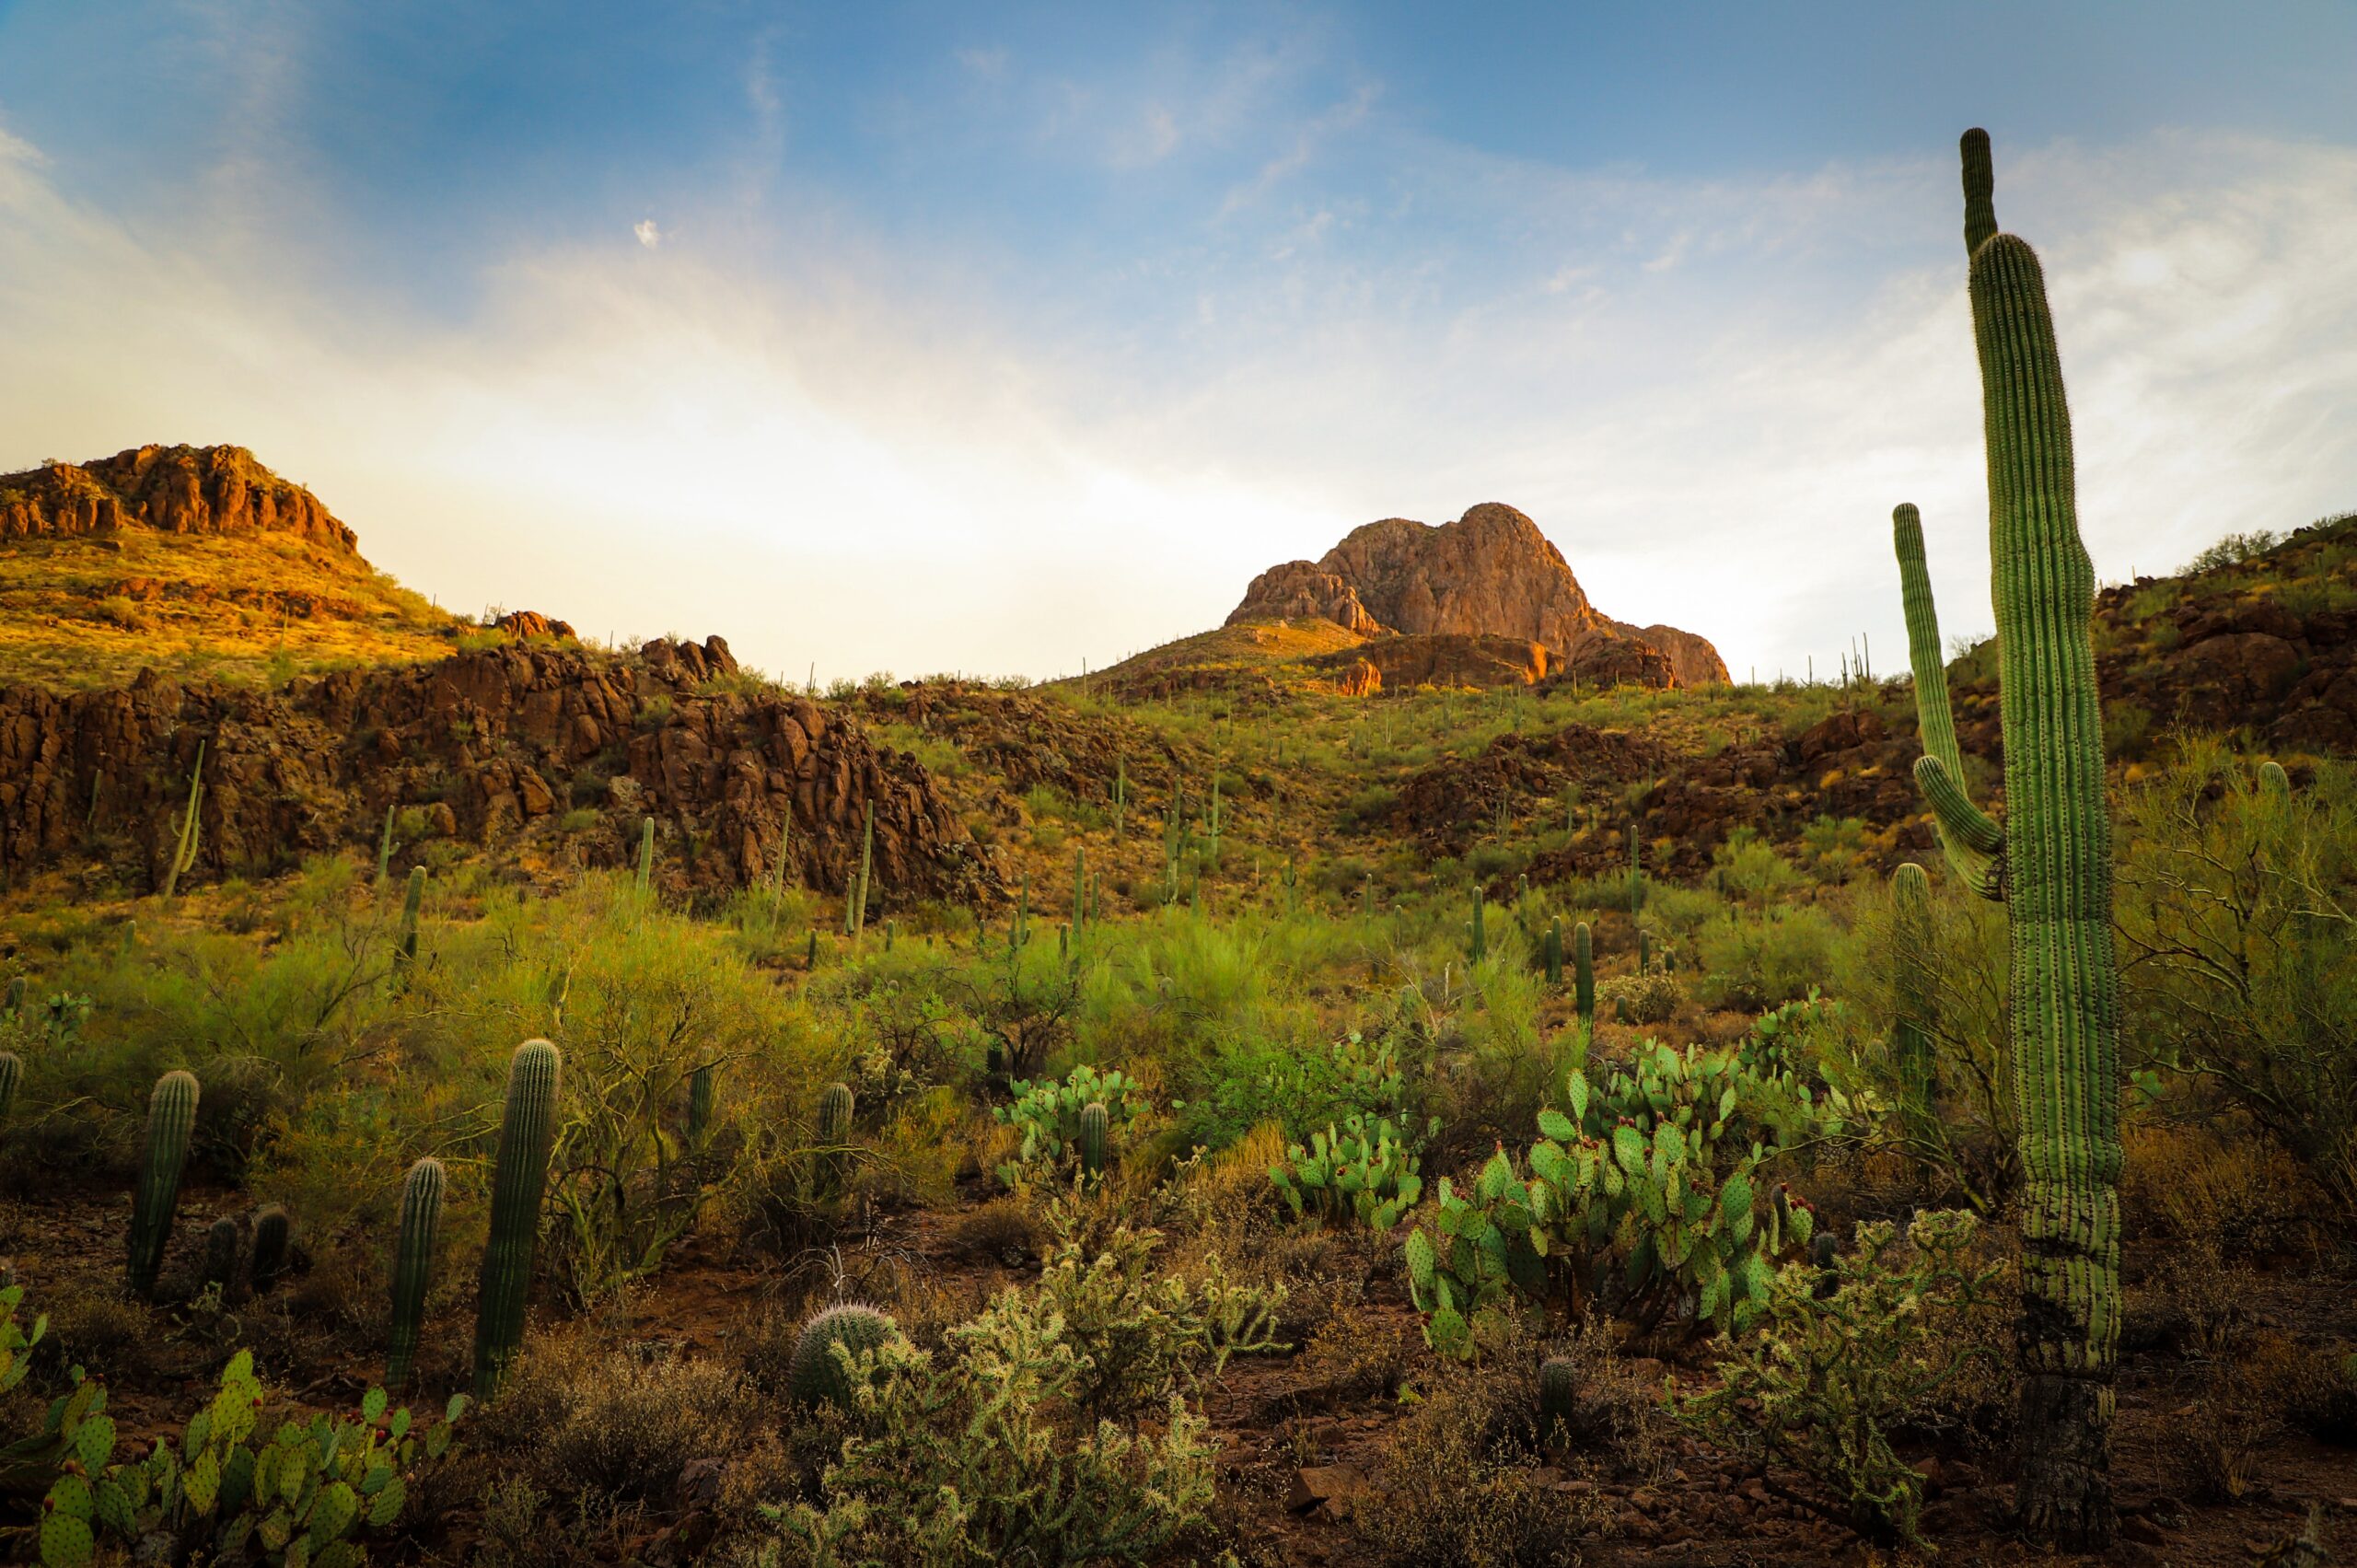 Tucson is one of the best places to live in Arizona for hiking and mountain views. Pictured: Tucson, Arizona